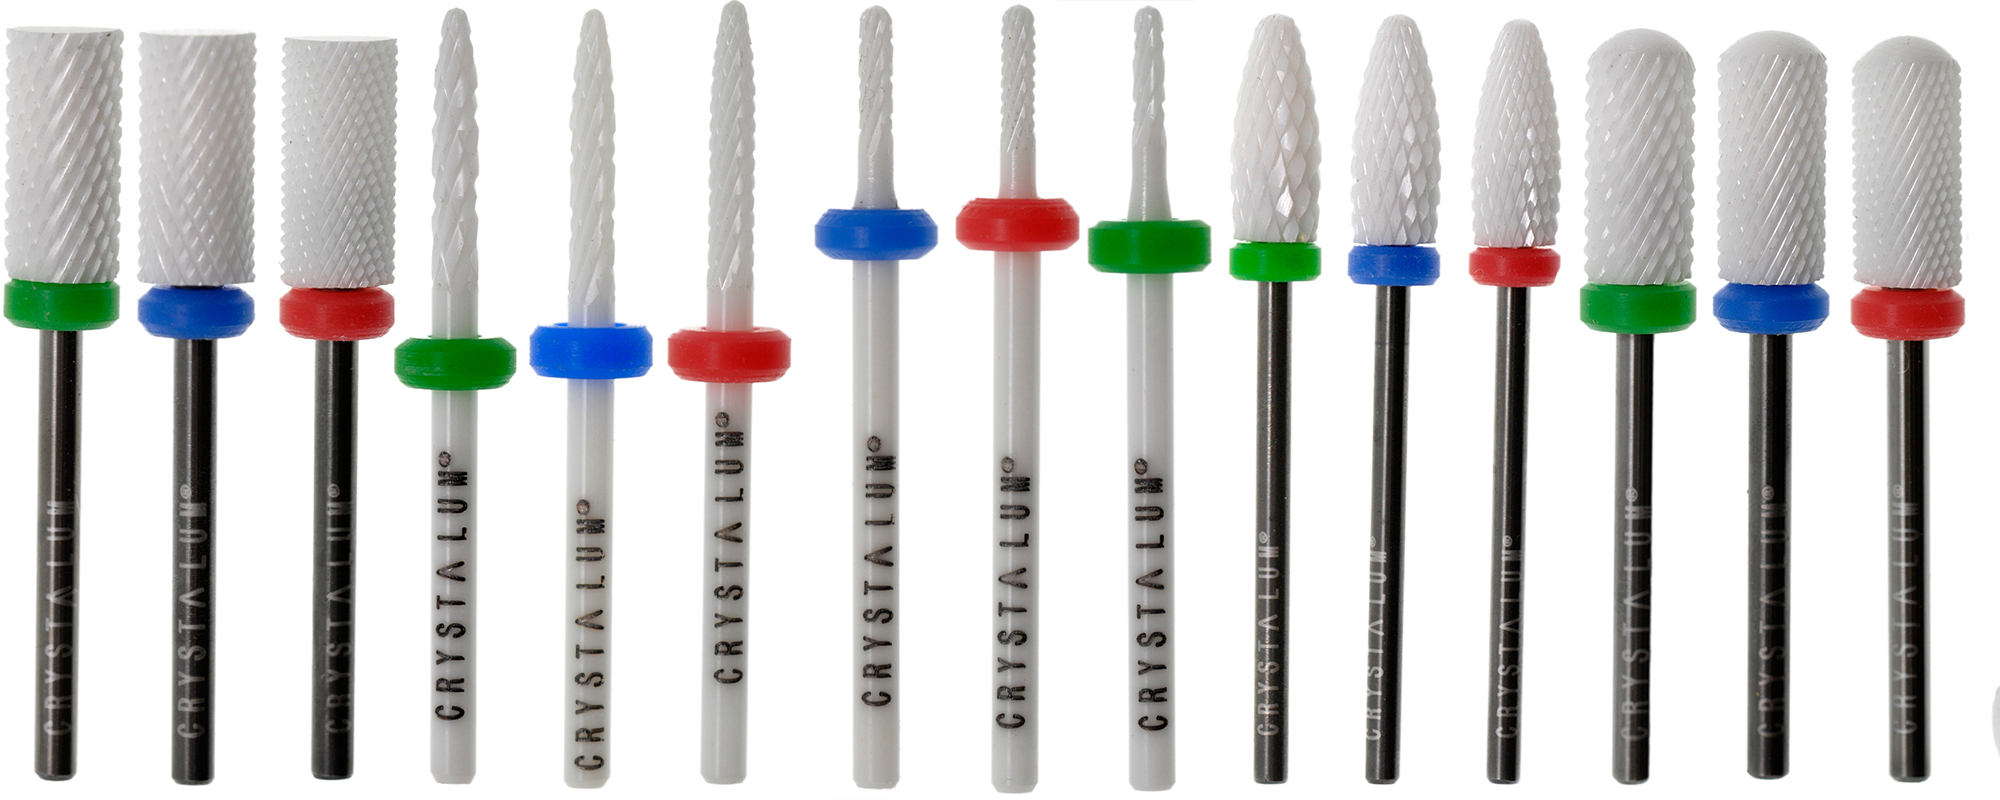 5. Nail Art Drill Bits: A Beginner's Guide - wide 1